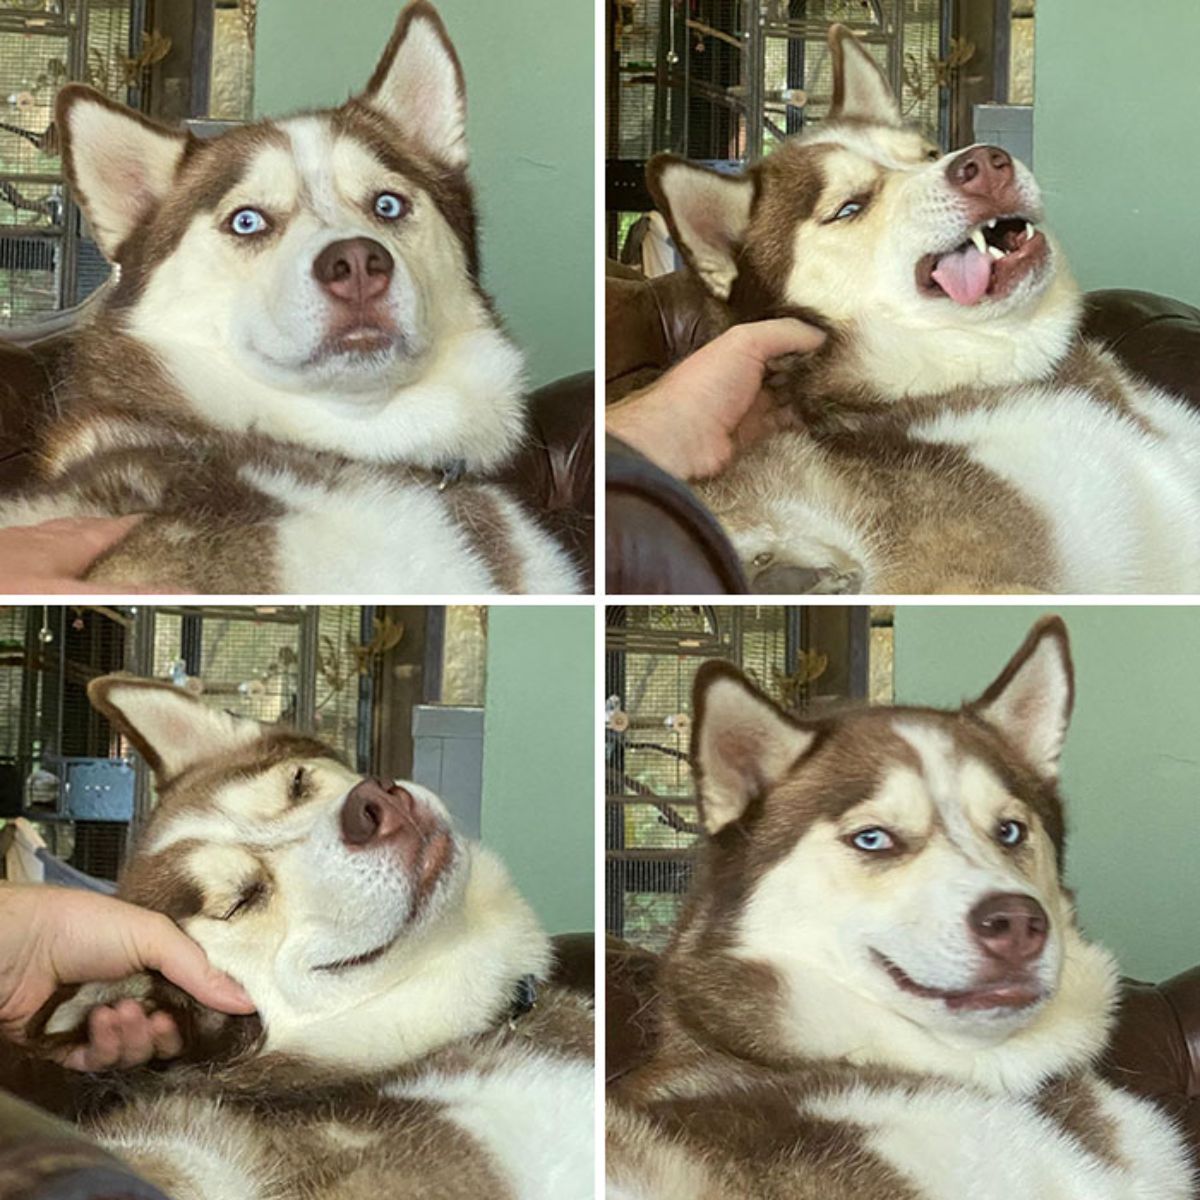 4 photos of a husky getting petted and making derpy faces